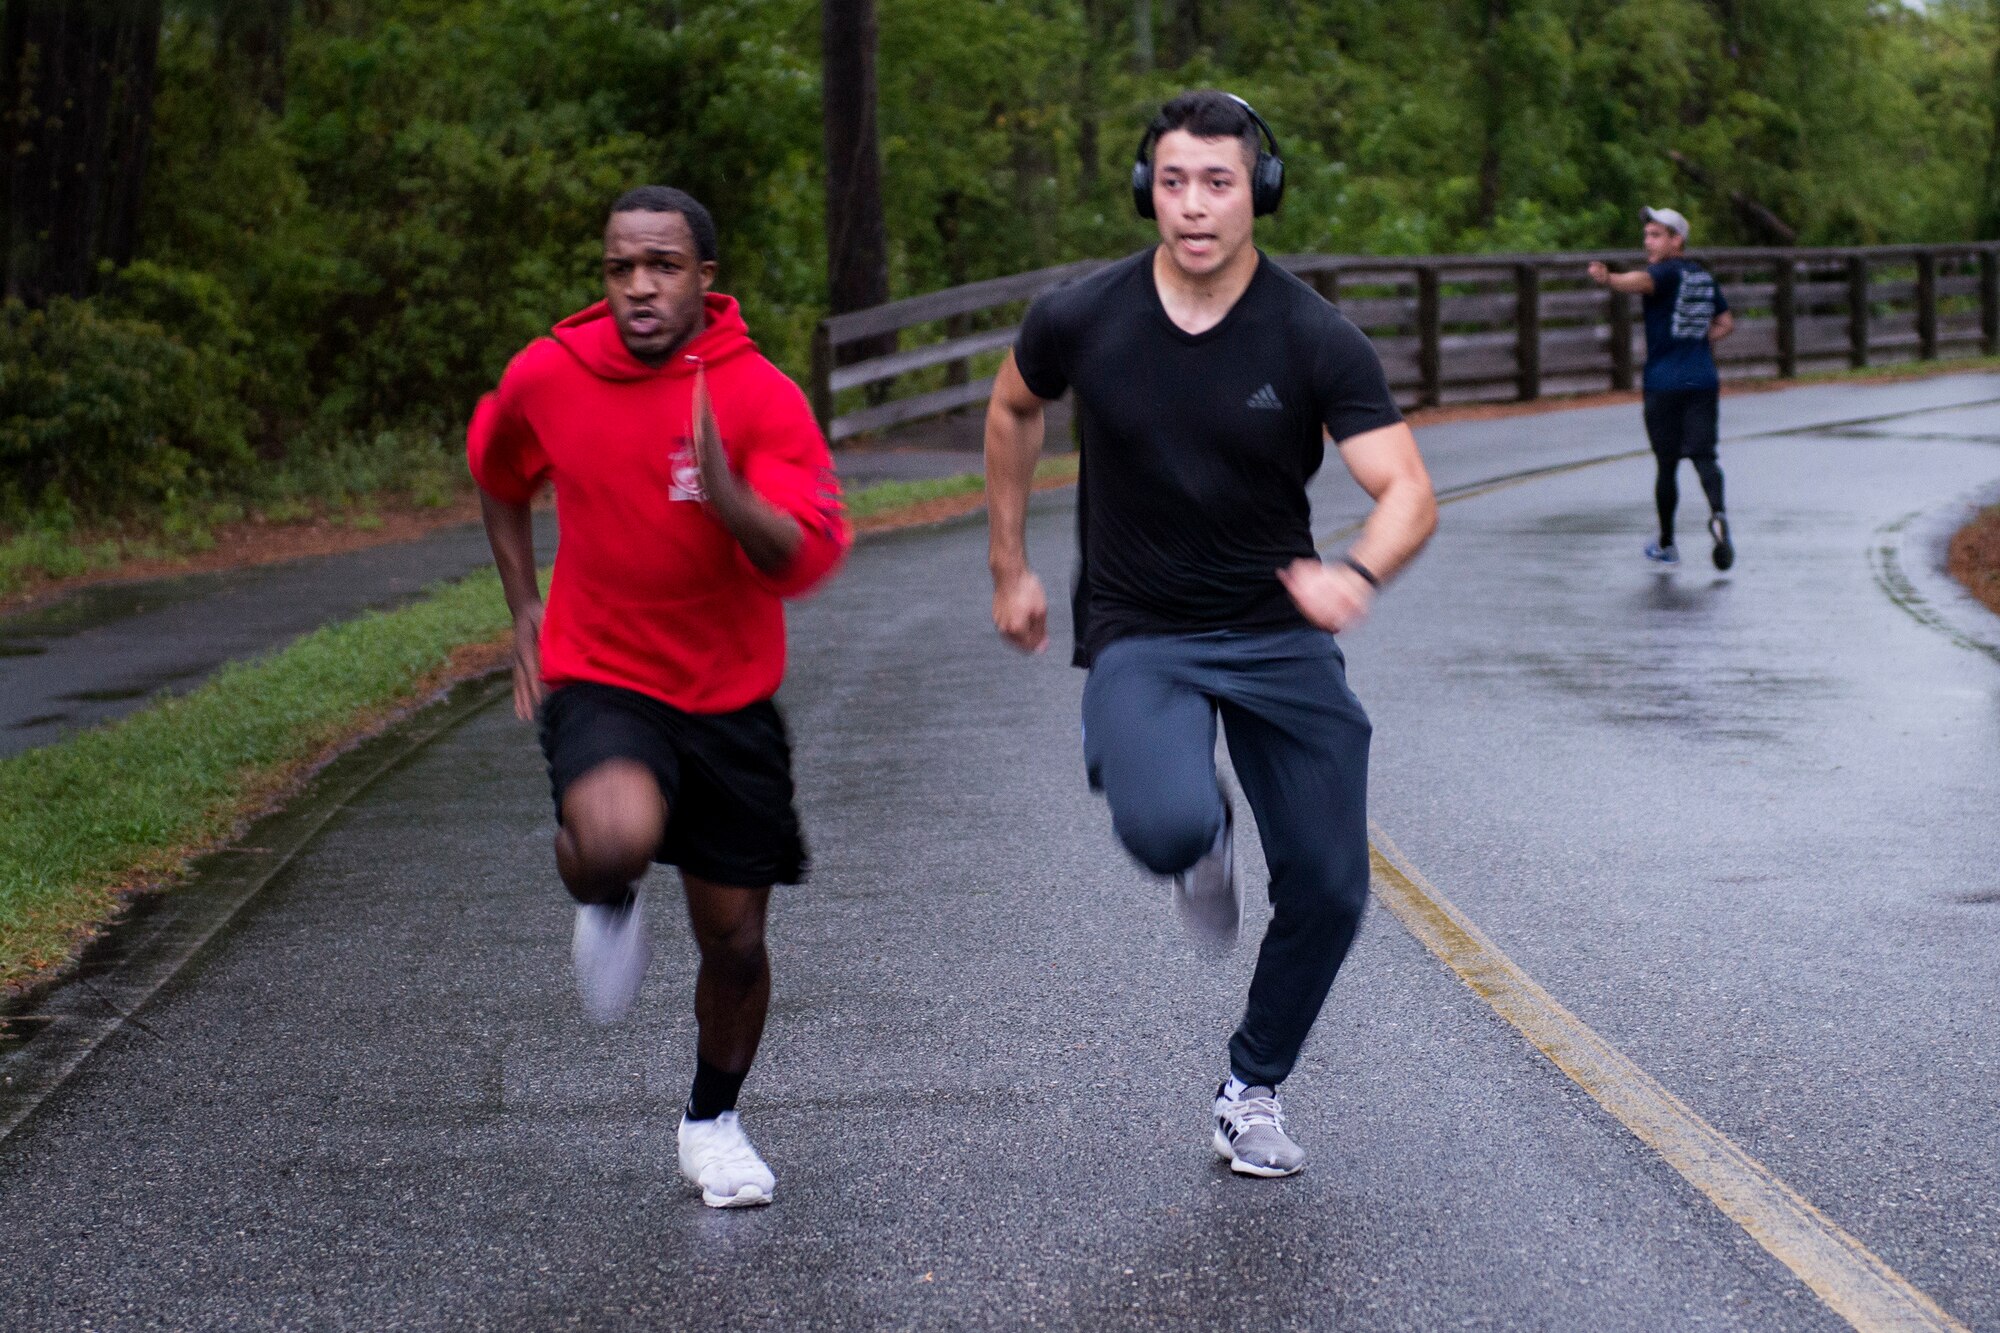 Airman 1st Class Frederick Marseille, left, 23d Maintenance Squadron aerospace propulsion journeyman, and Airman 1st Class Kenneth Batista, 23d Maintenance Squadron conventional ammo technician, run the final stretch of the Empower Women 5k, March 30, 2018, at Moody Air Force Base, Ga. The event concluded National Women’s History Month, celebrating and honoring the social, economical, cultural and political achievements of both military and civilian women both military and civilian. (U.S. Air Force photo by Airman 1st Class Erick Requadt)